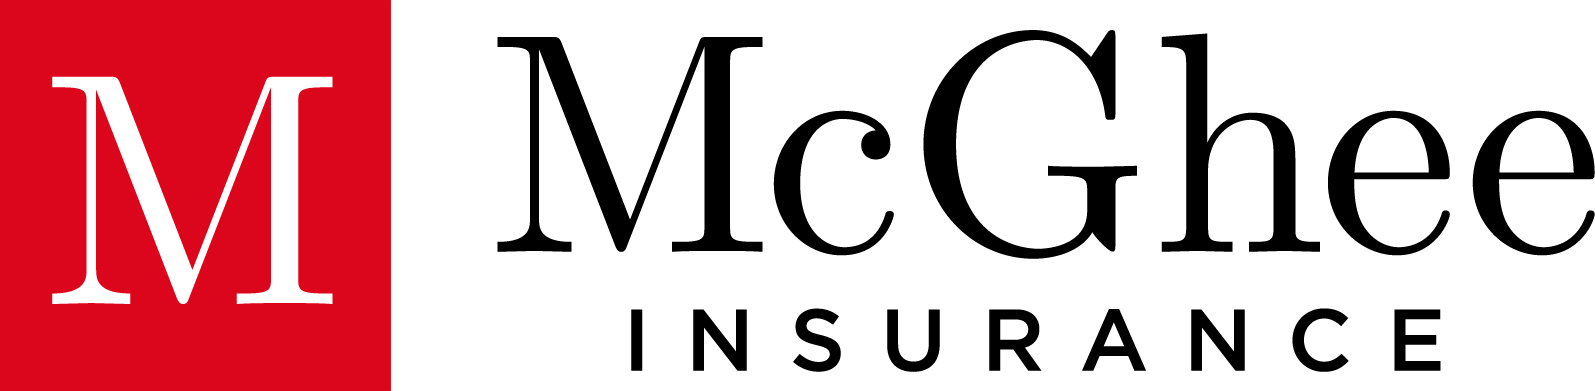 Relation Insurance Services, Inc. Expands into Arkansas with the Acquisition of McGhee Insurance Northwest Arkansas